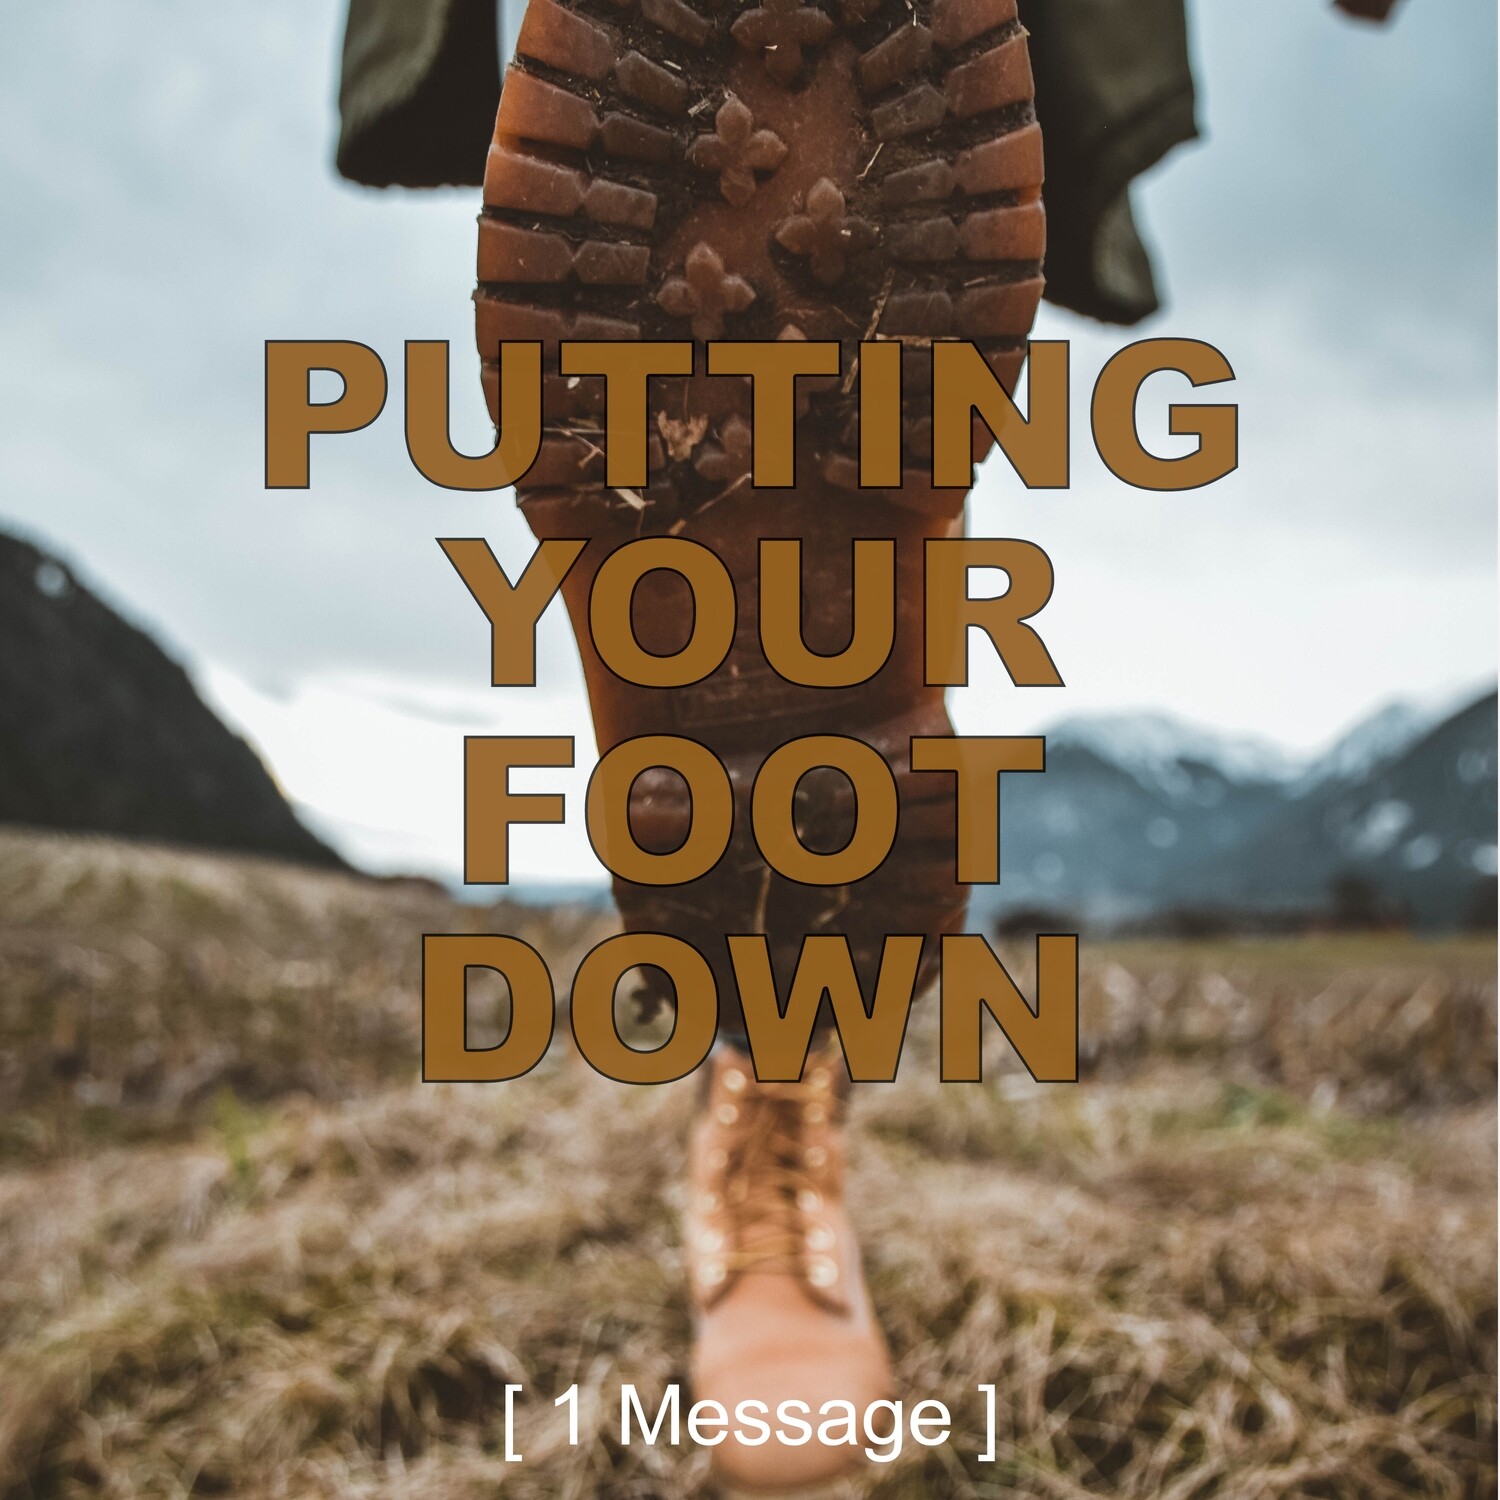 Putting Your Foot Down